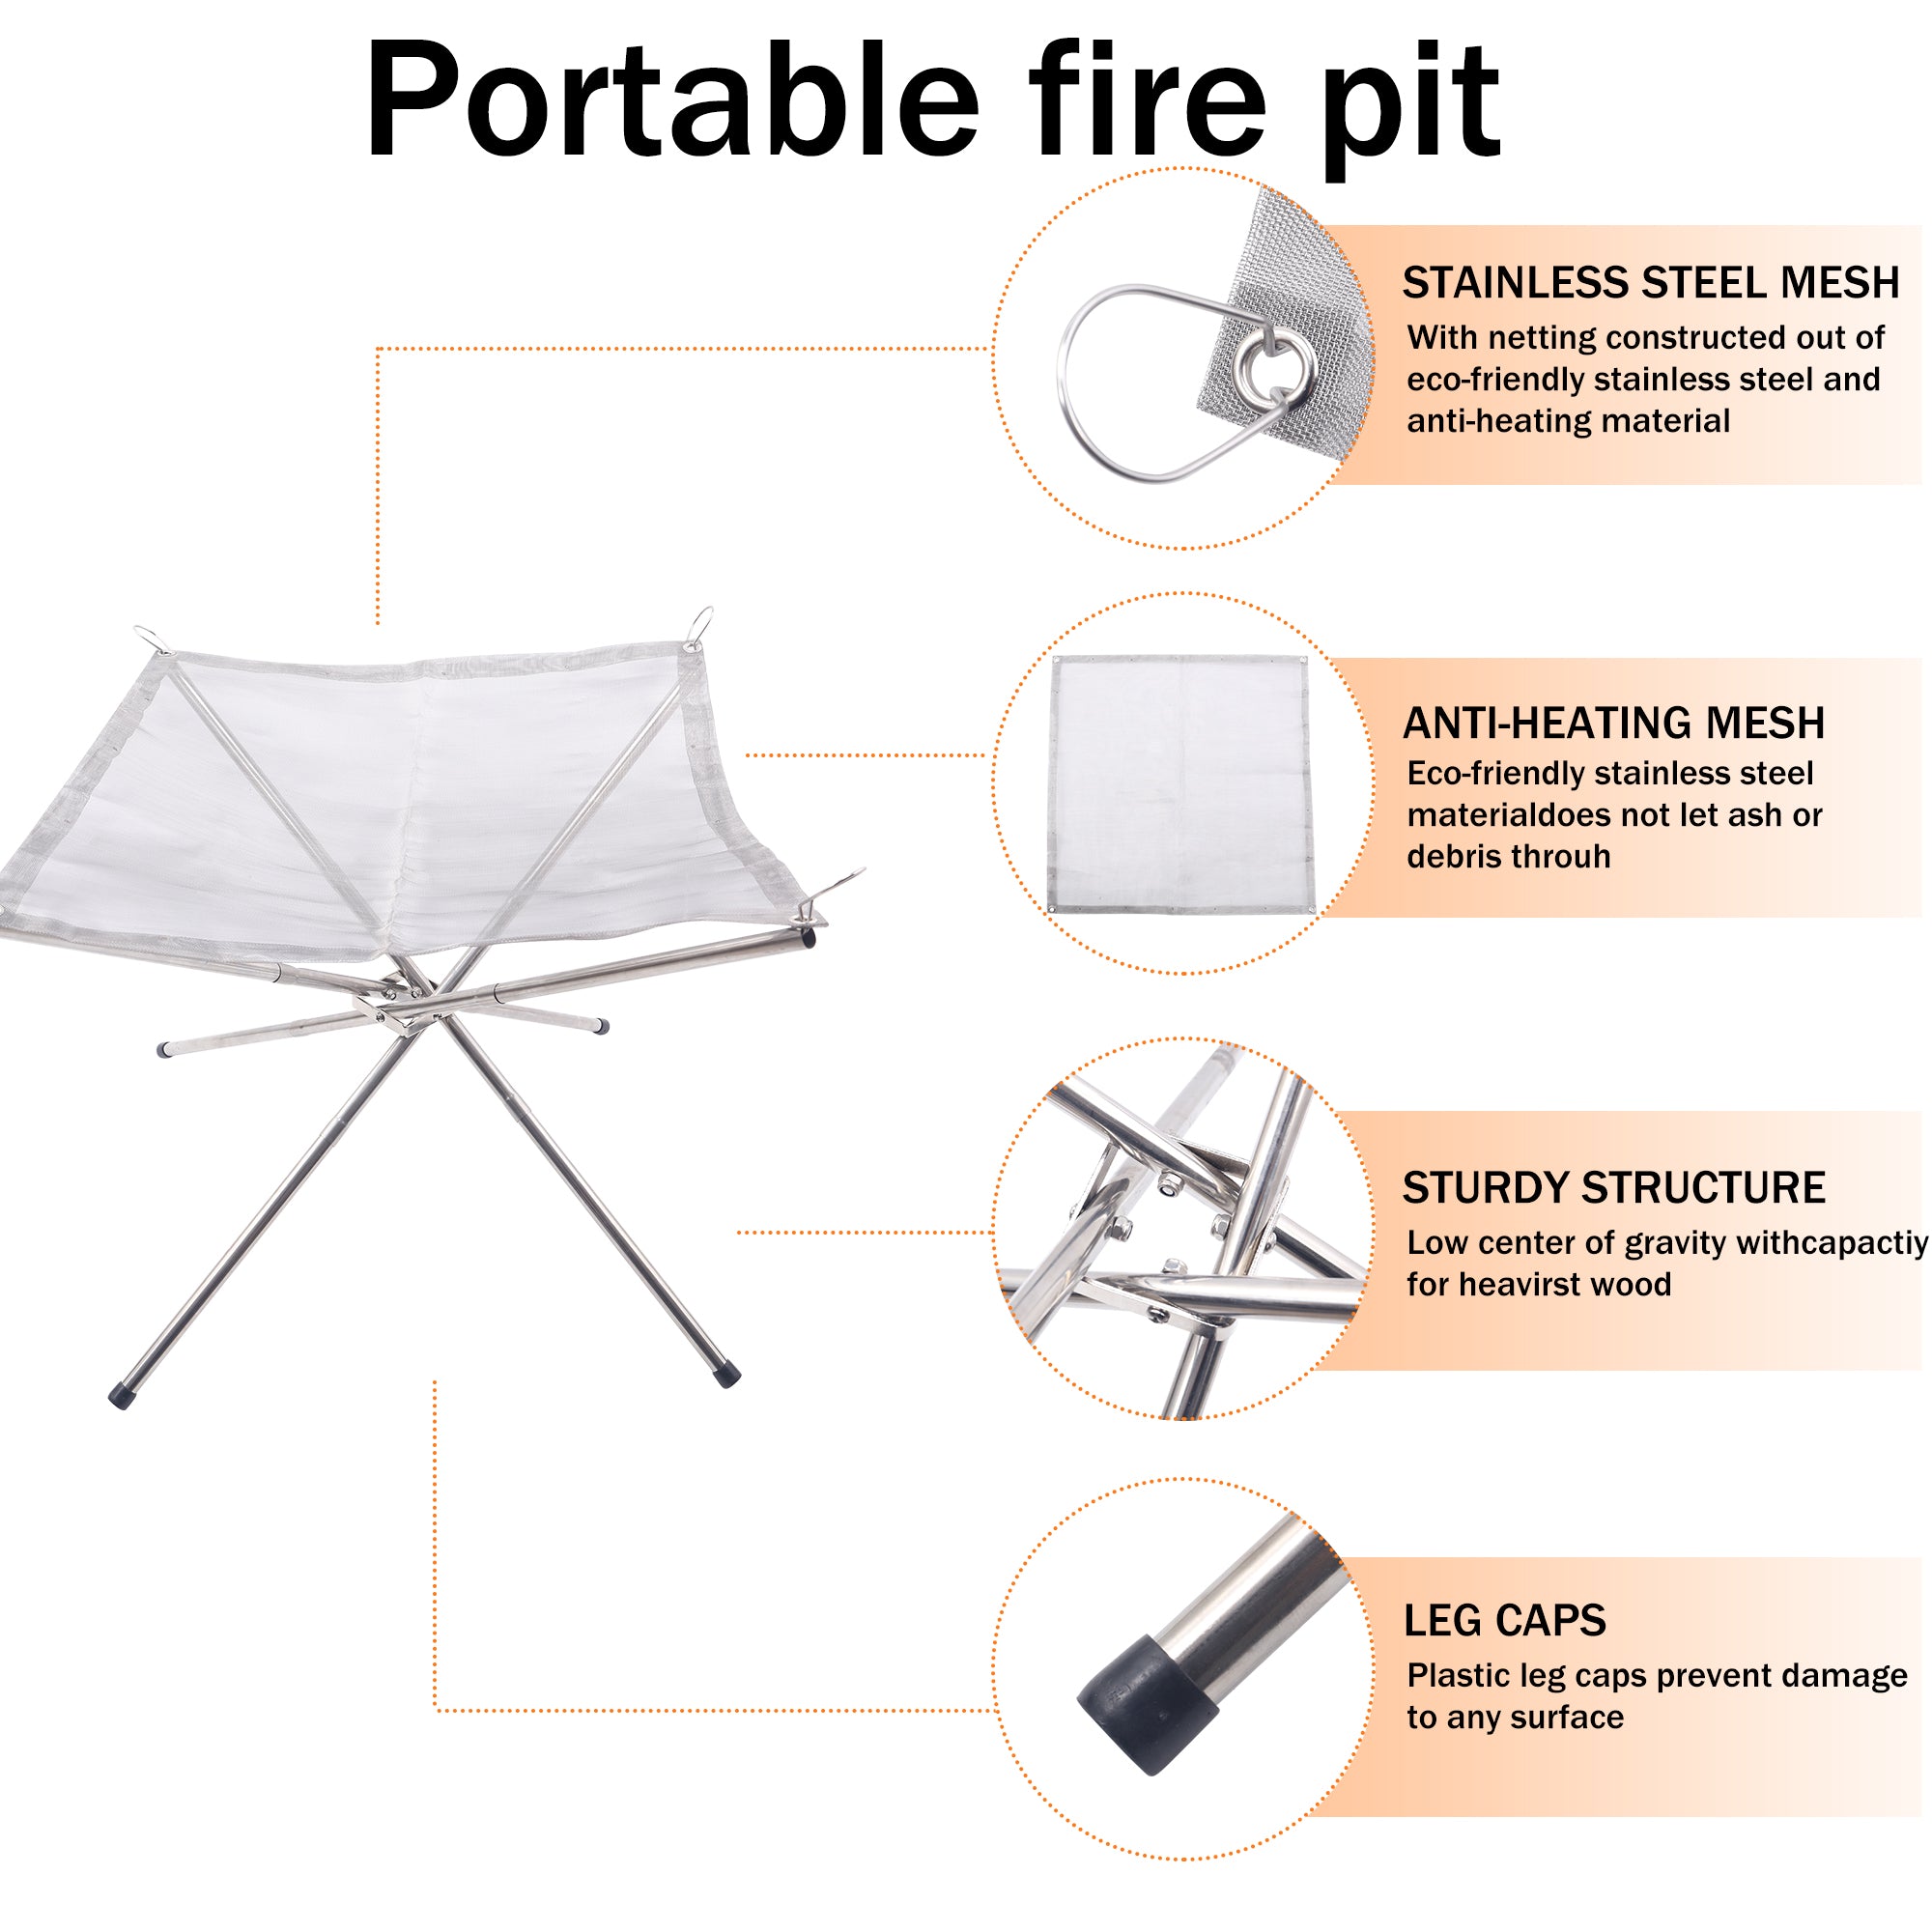 Features of Stainless Steel Fire Pit.